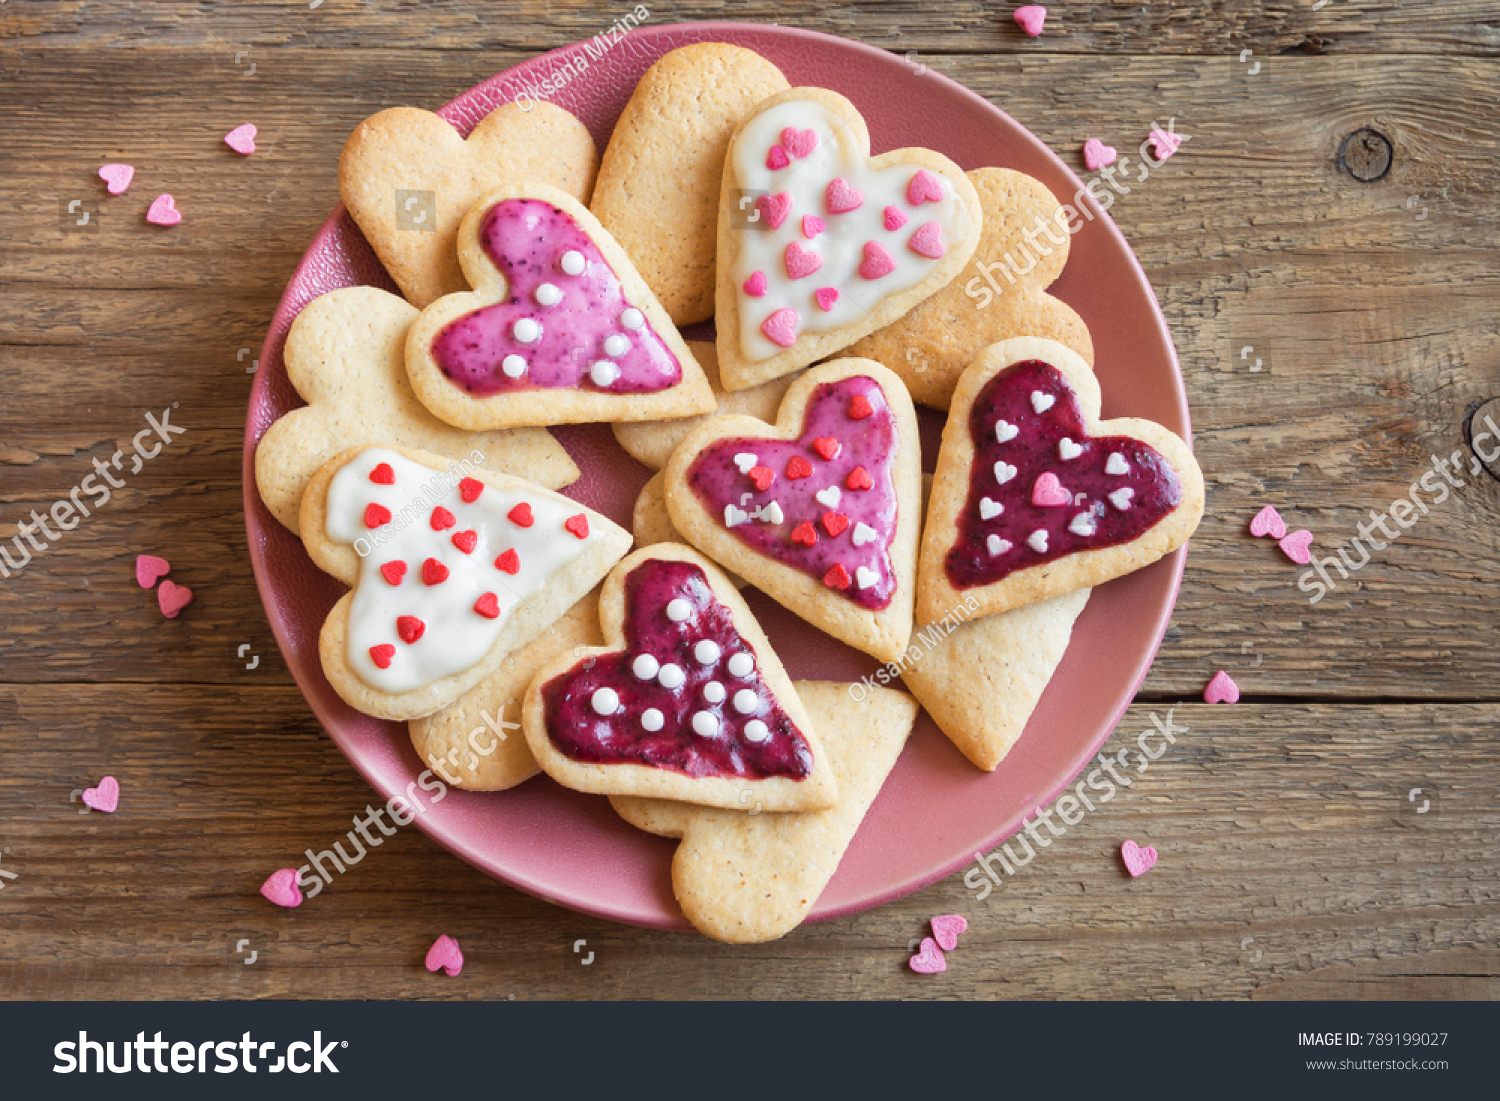 Glazed heart shaped cookies for Valentine's day - delicious homemade natural organic pastry, baking with love for Valentine's day, love concept #789199027